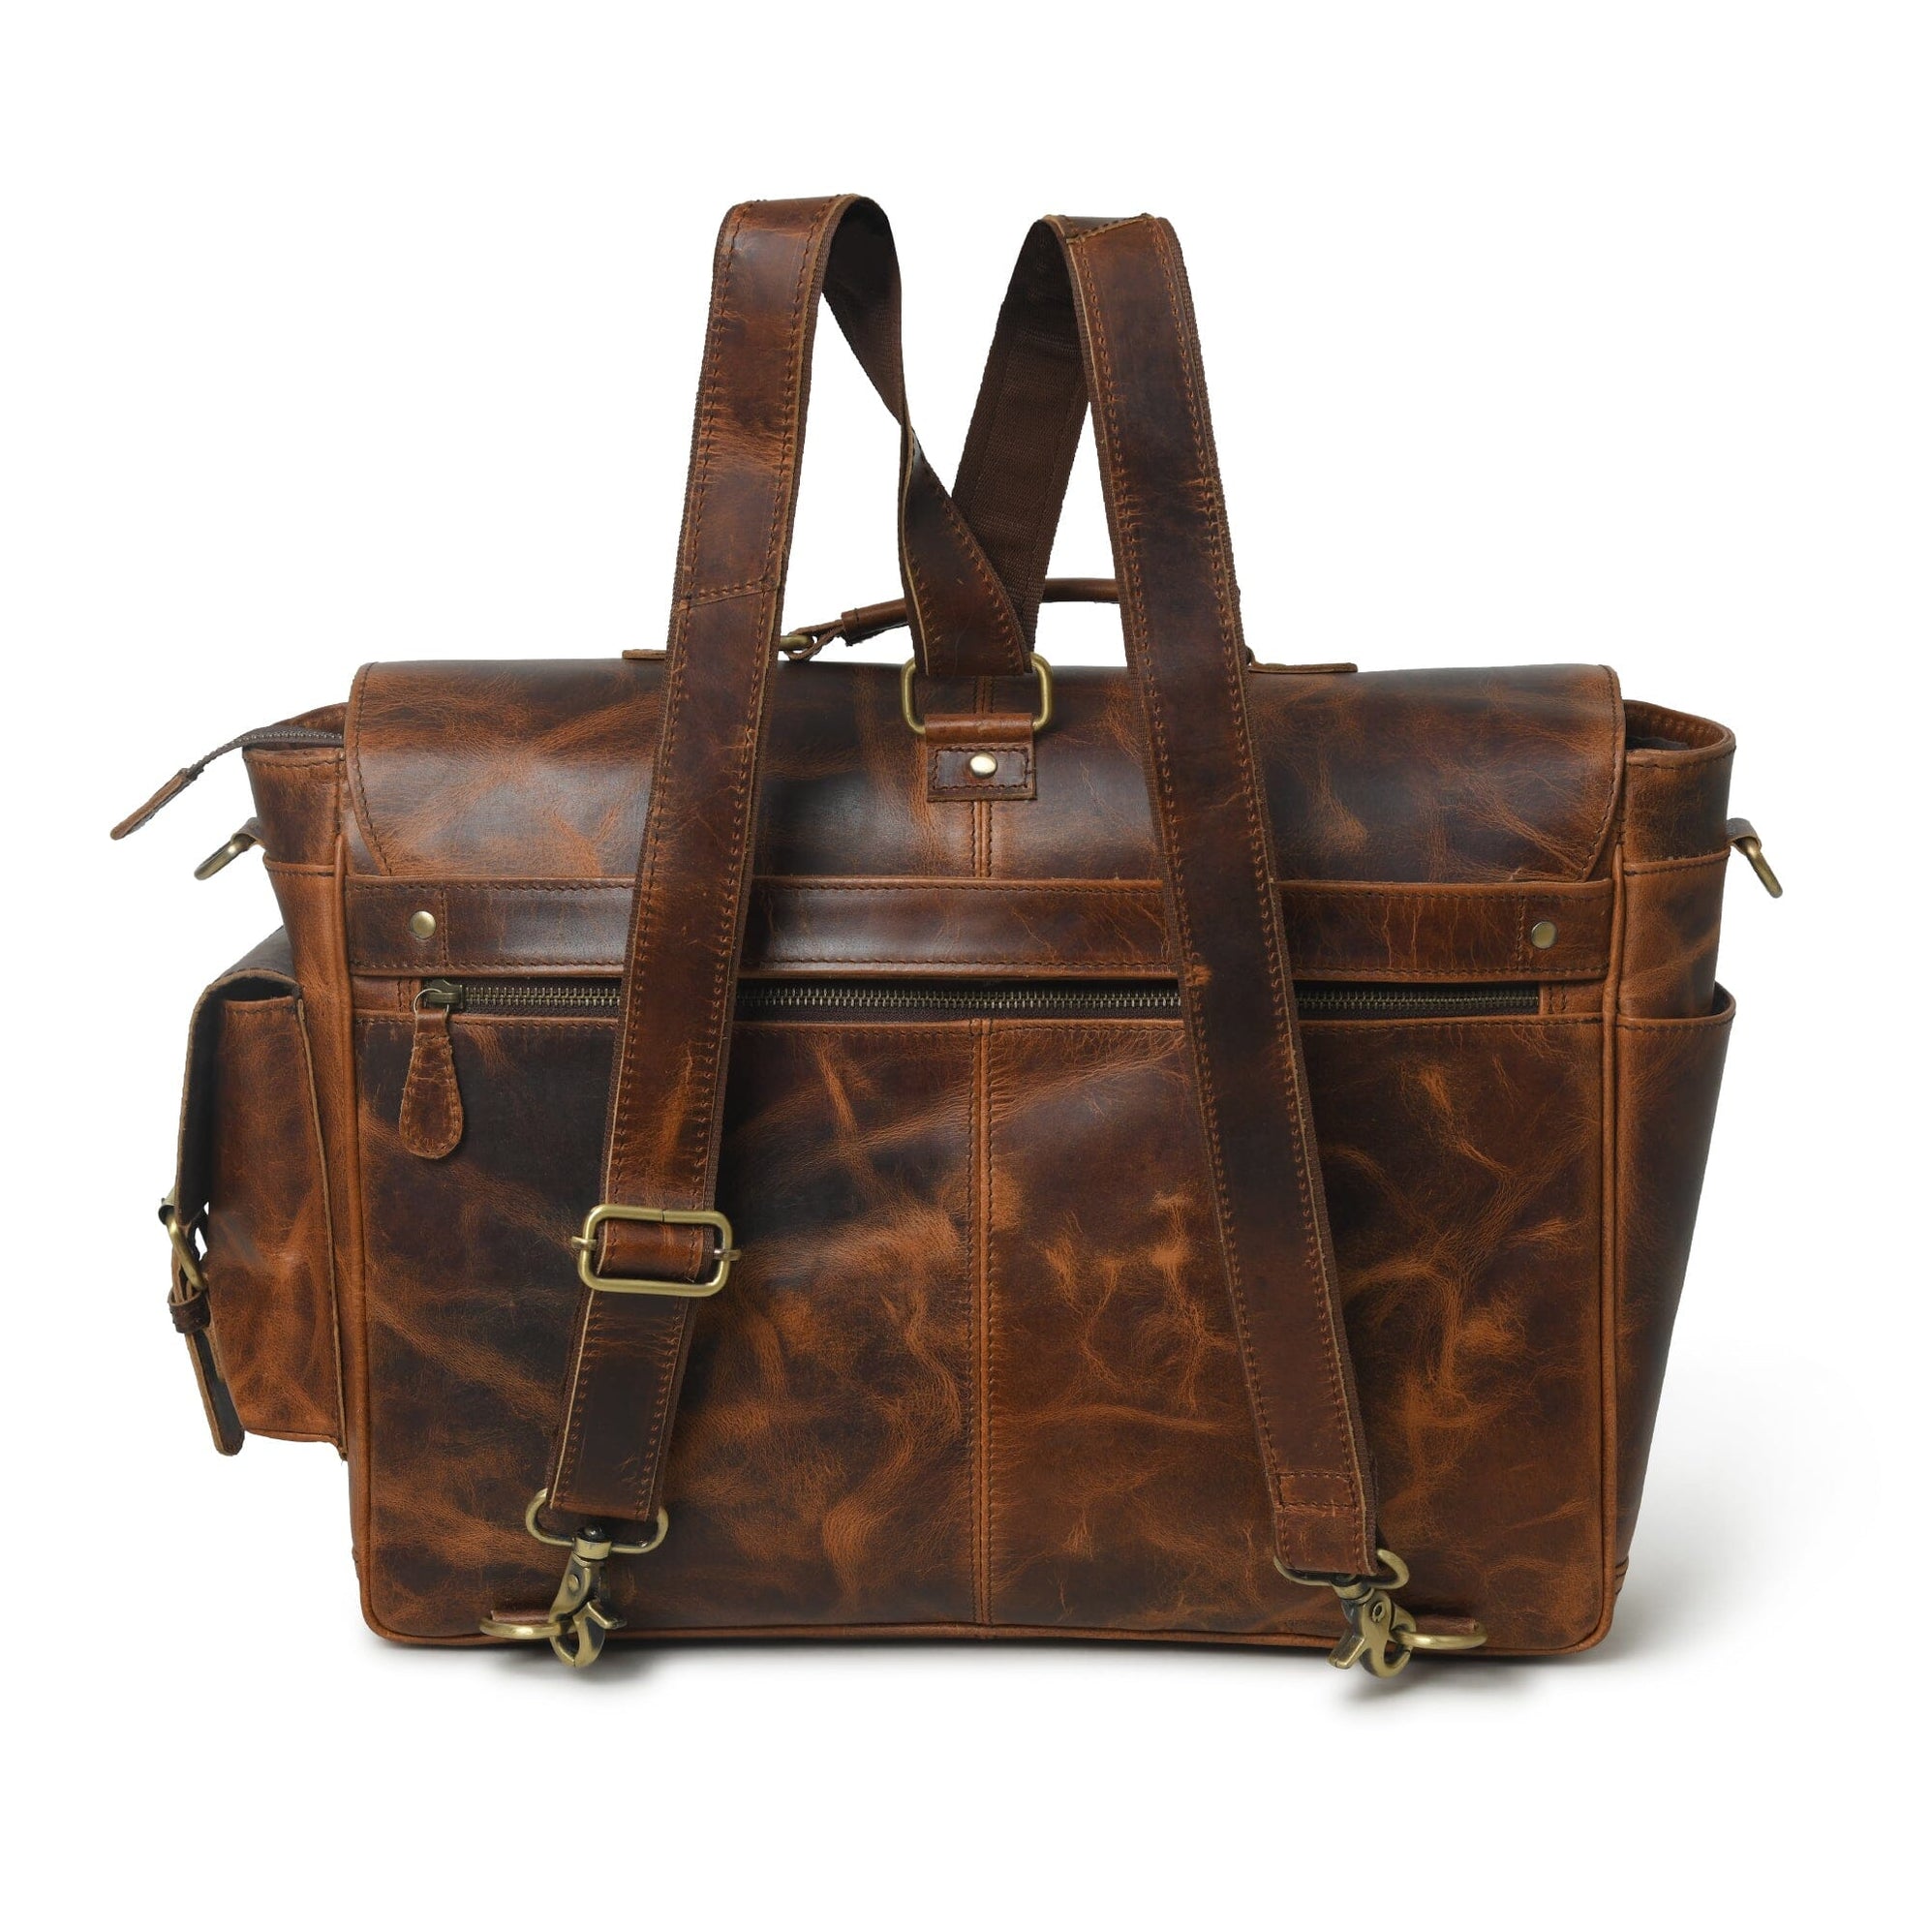 Shop Leather Bags & Leather Goods, Jackets Online in USA — Classy ...